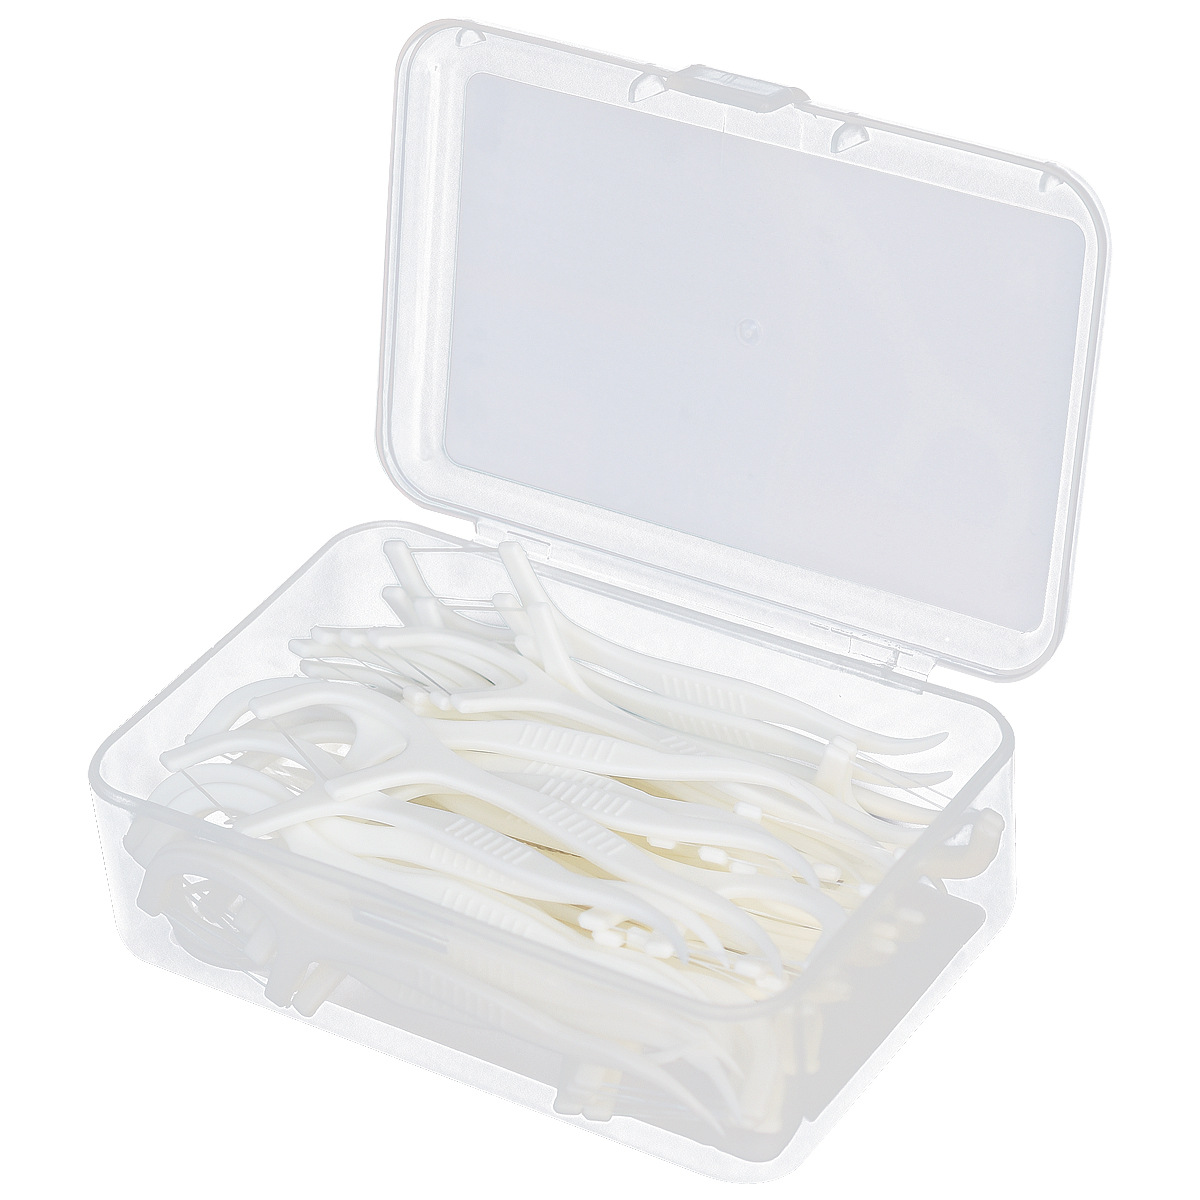  Tooth Cleaner floss pick Dental Floss Picks 50PCS High Toughness Professional Toothpicks Sticks with Portable Case and Dental Picks Perfect for Family,Hotel,Travel